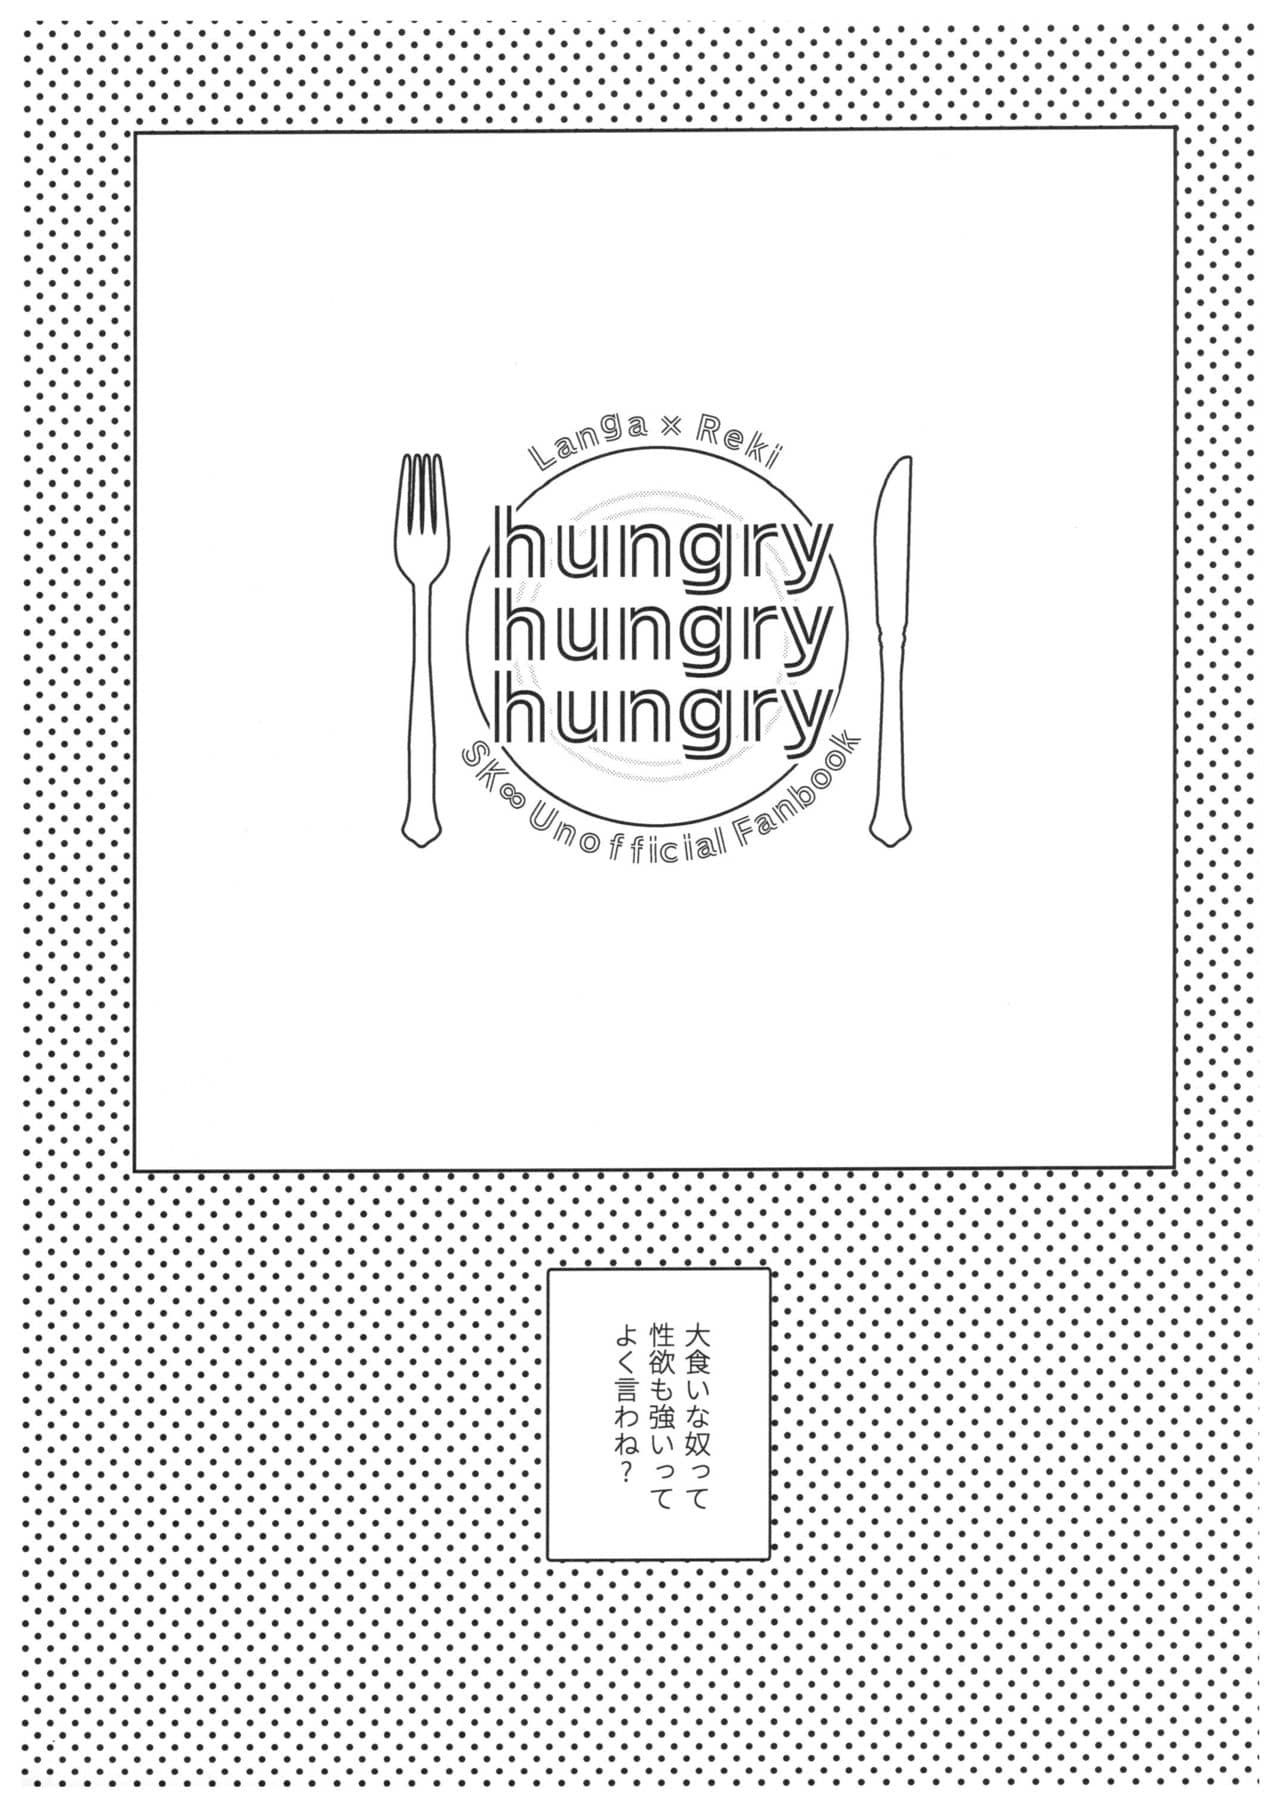 Hungry hungry hungry - Foto 4